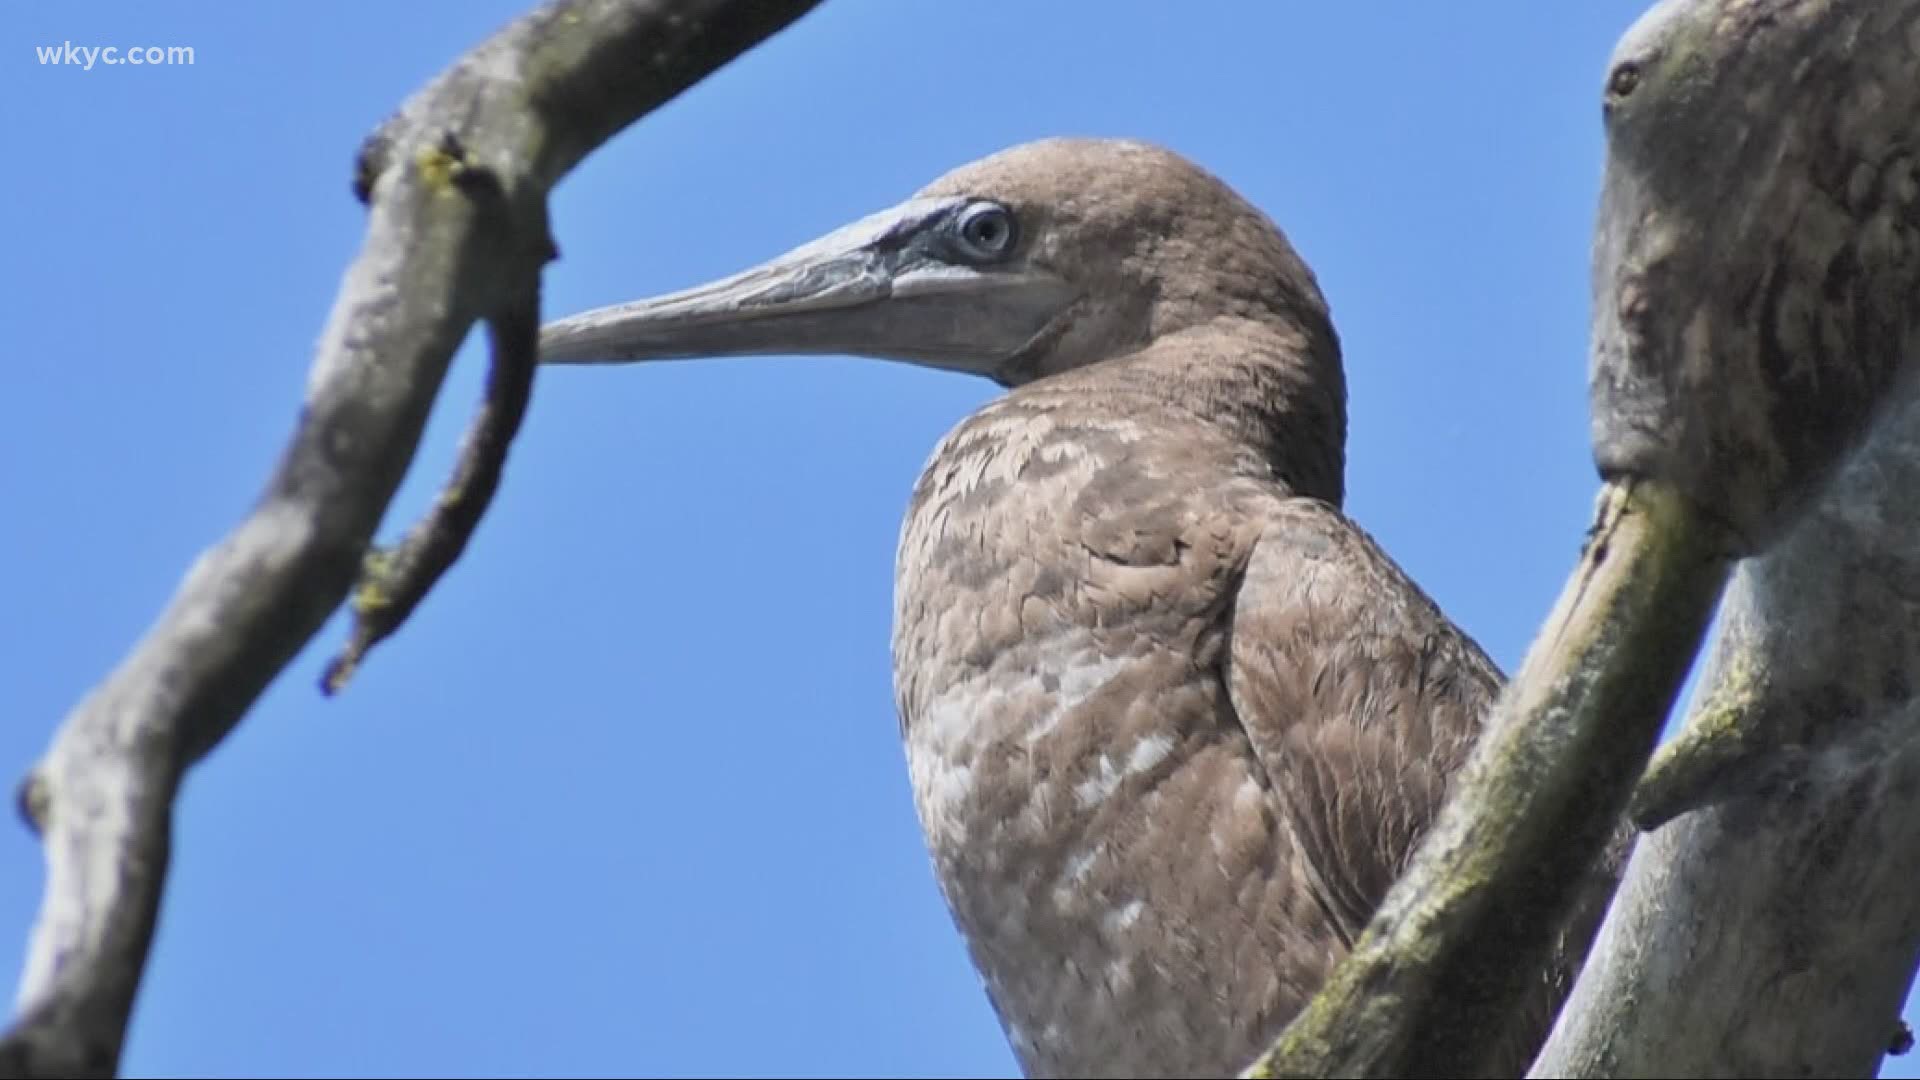 Brown Booby bird has thousands flocking to Nimisila Reservoir to photograph and catch a glimpse of this rarity. Carl Bachtel reports.